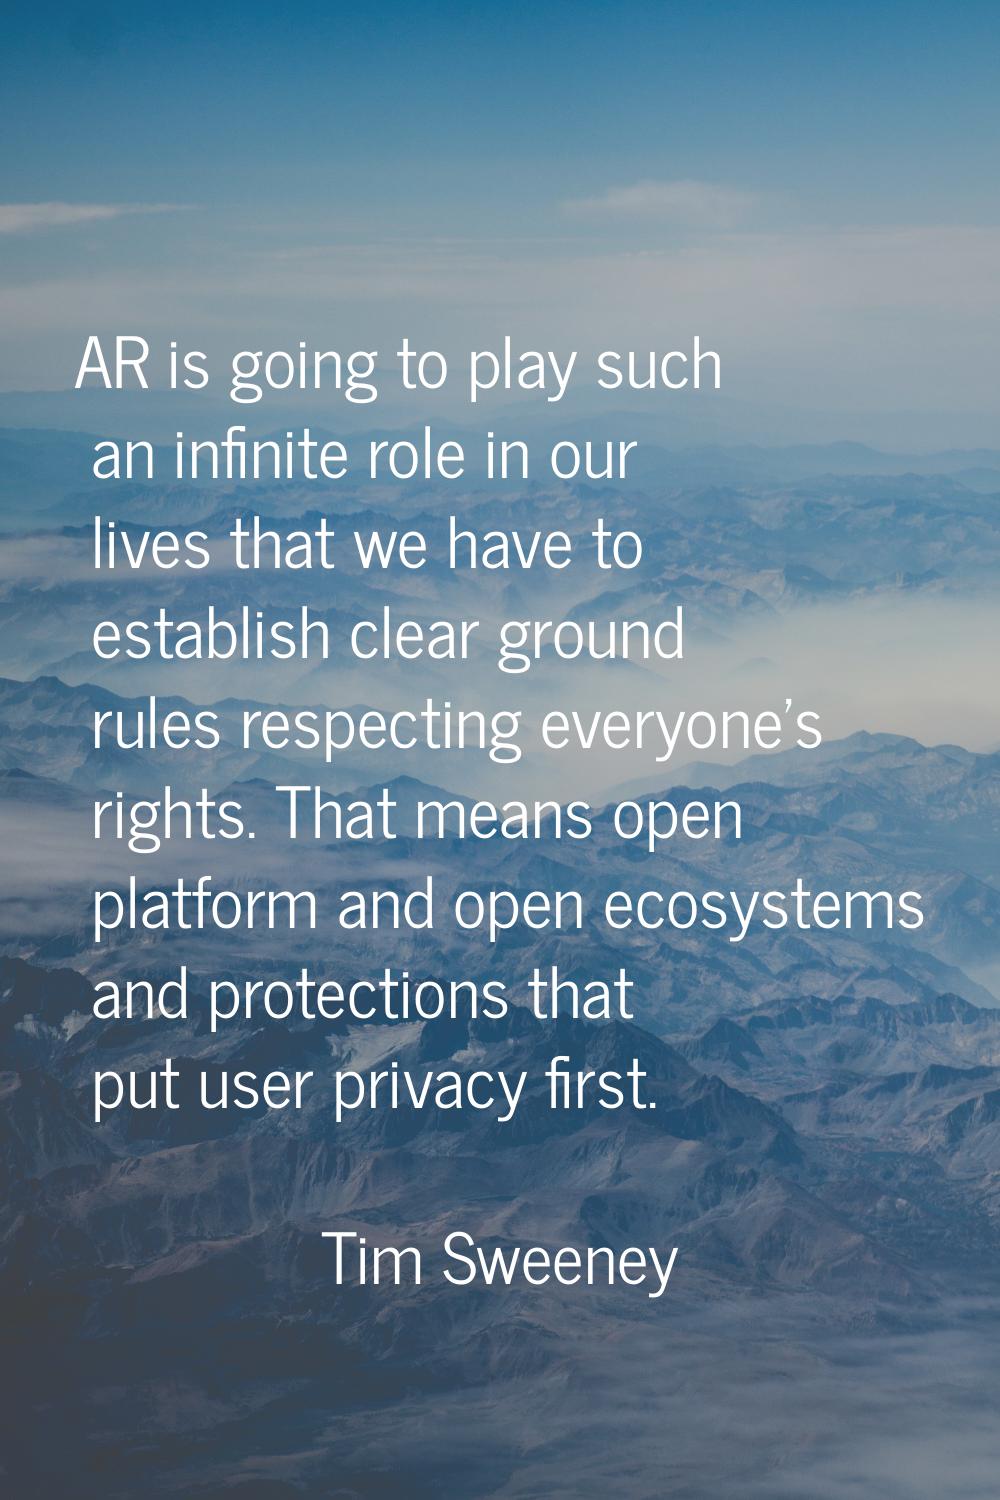 AR is going to play such an infinite role in our lives that we have to establish clear ground rules